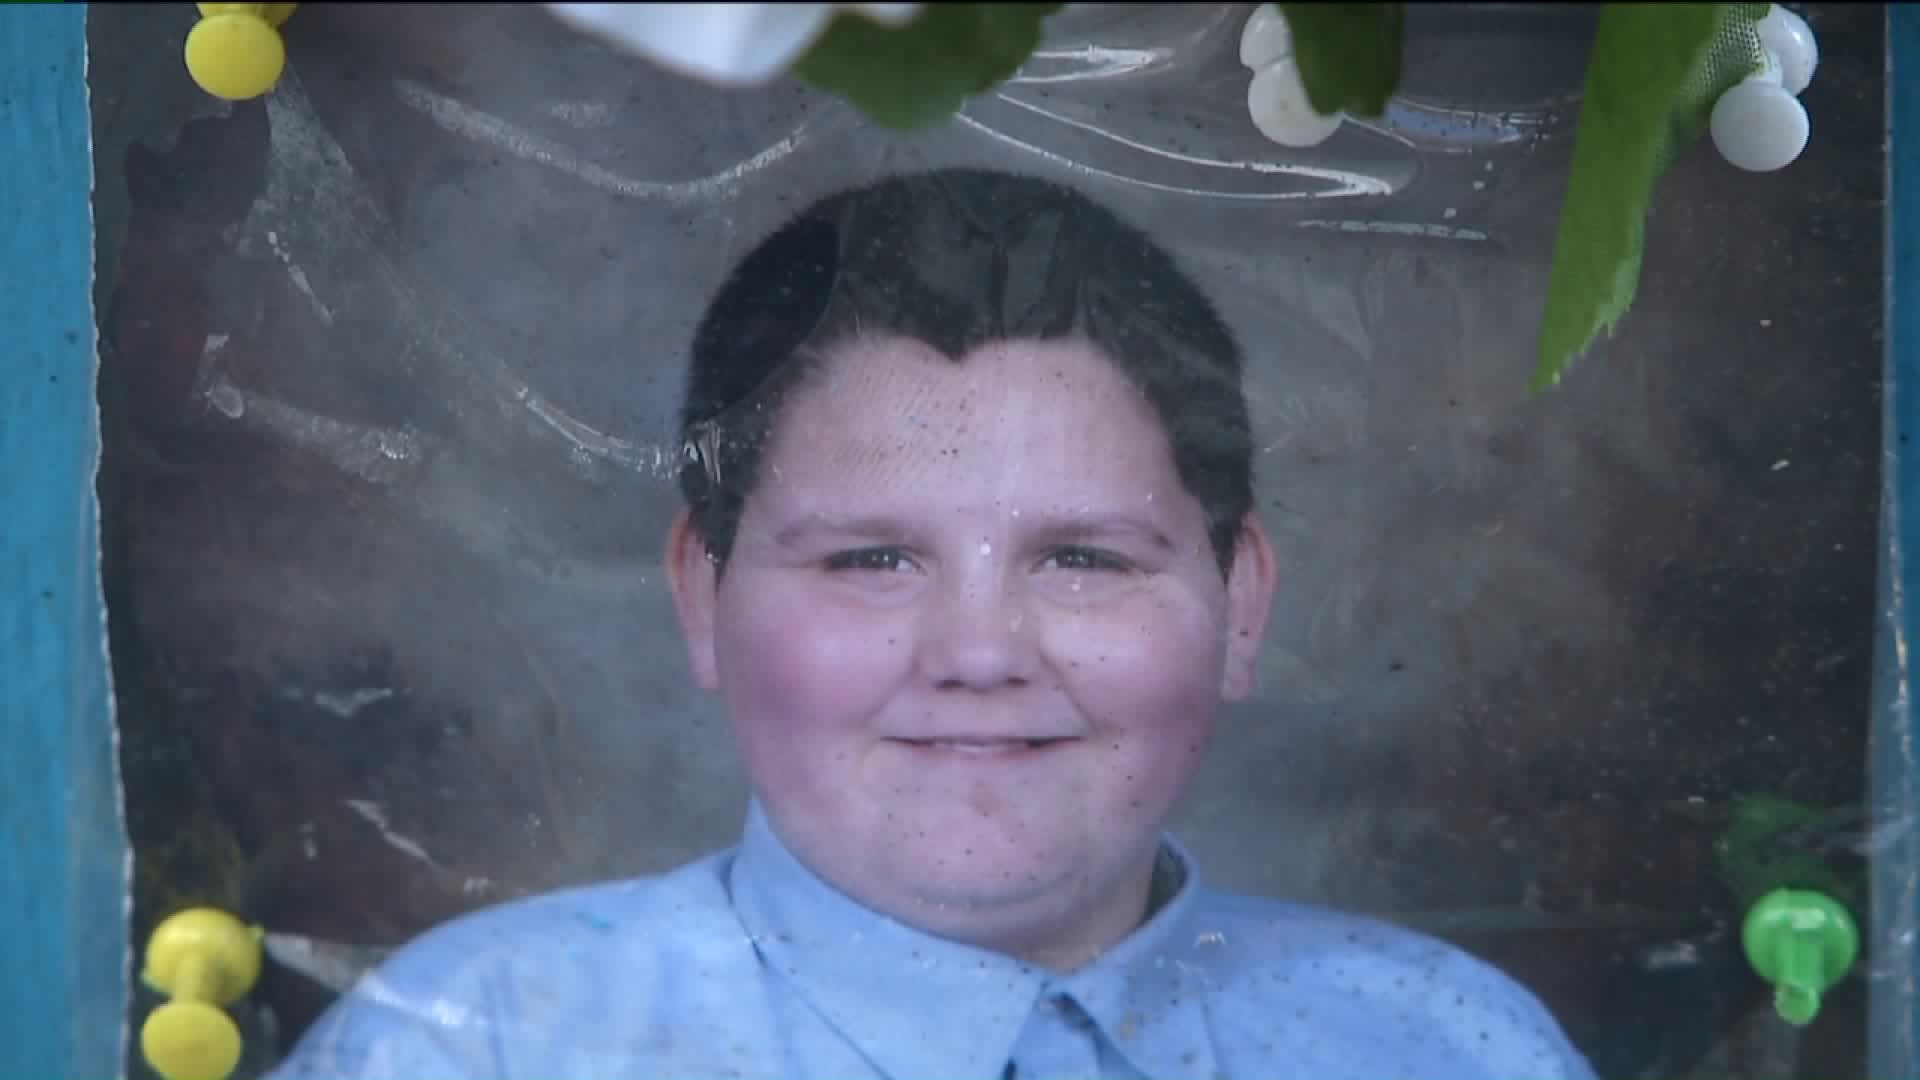 Remembering Teen Boy Killed on Bicycle